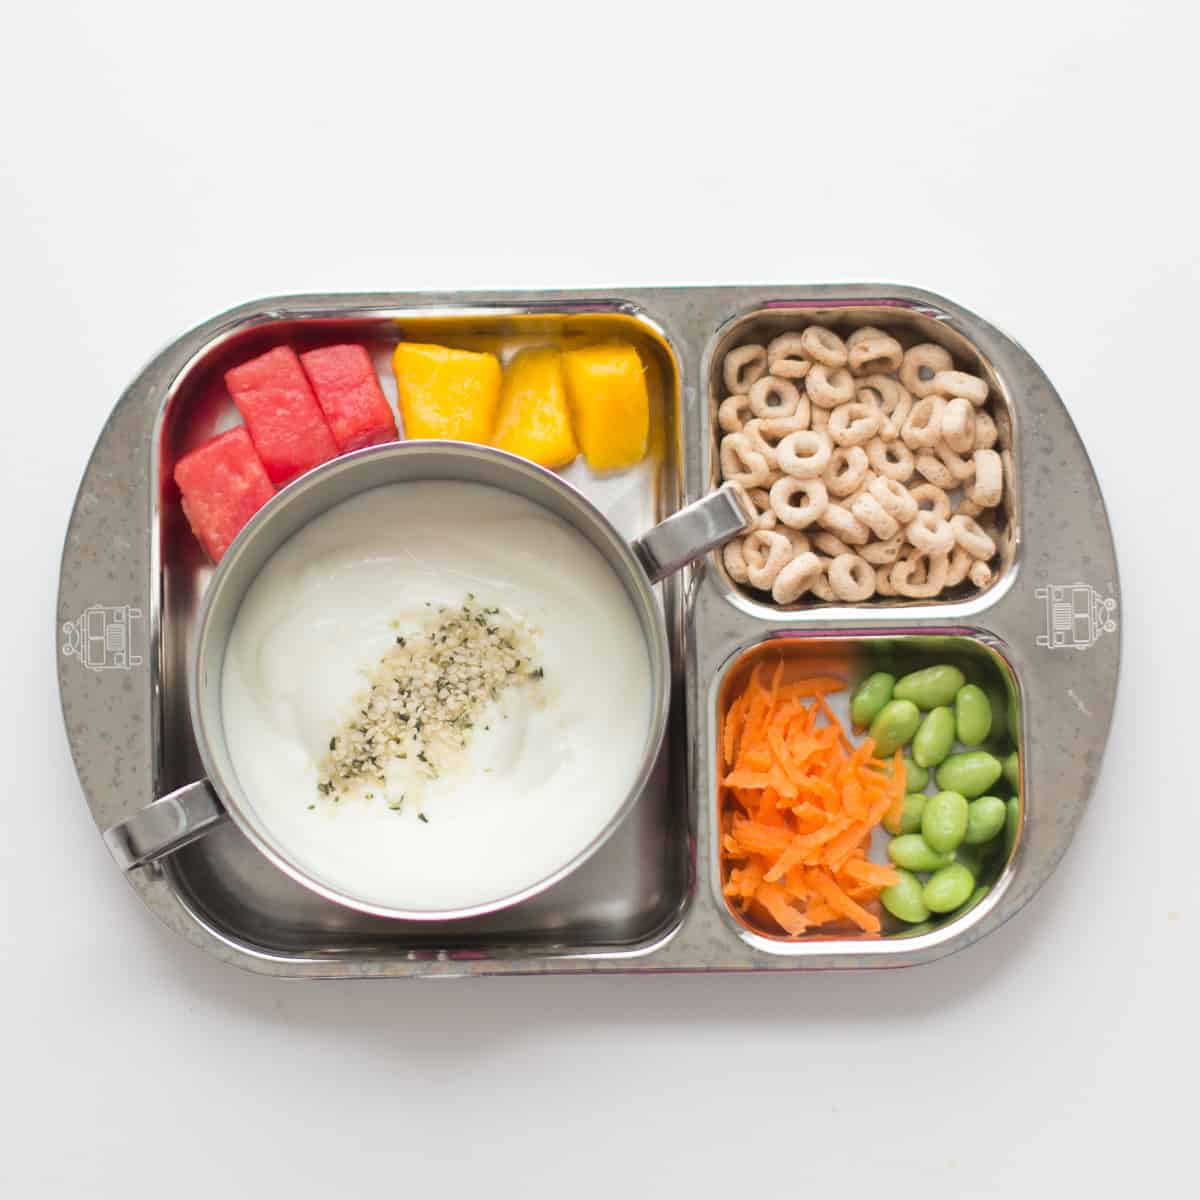 Yogurt buffet served in a stainless steel bowl and tray.